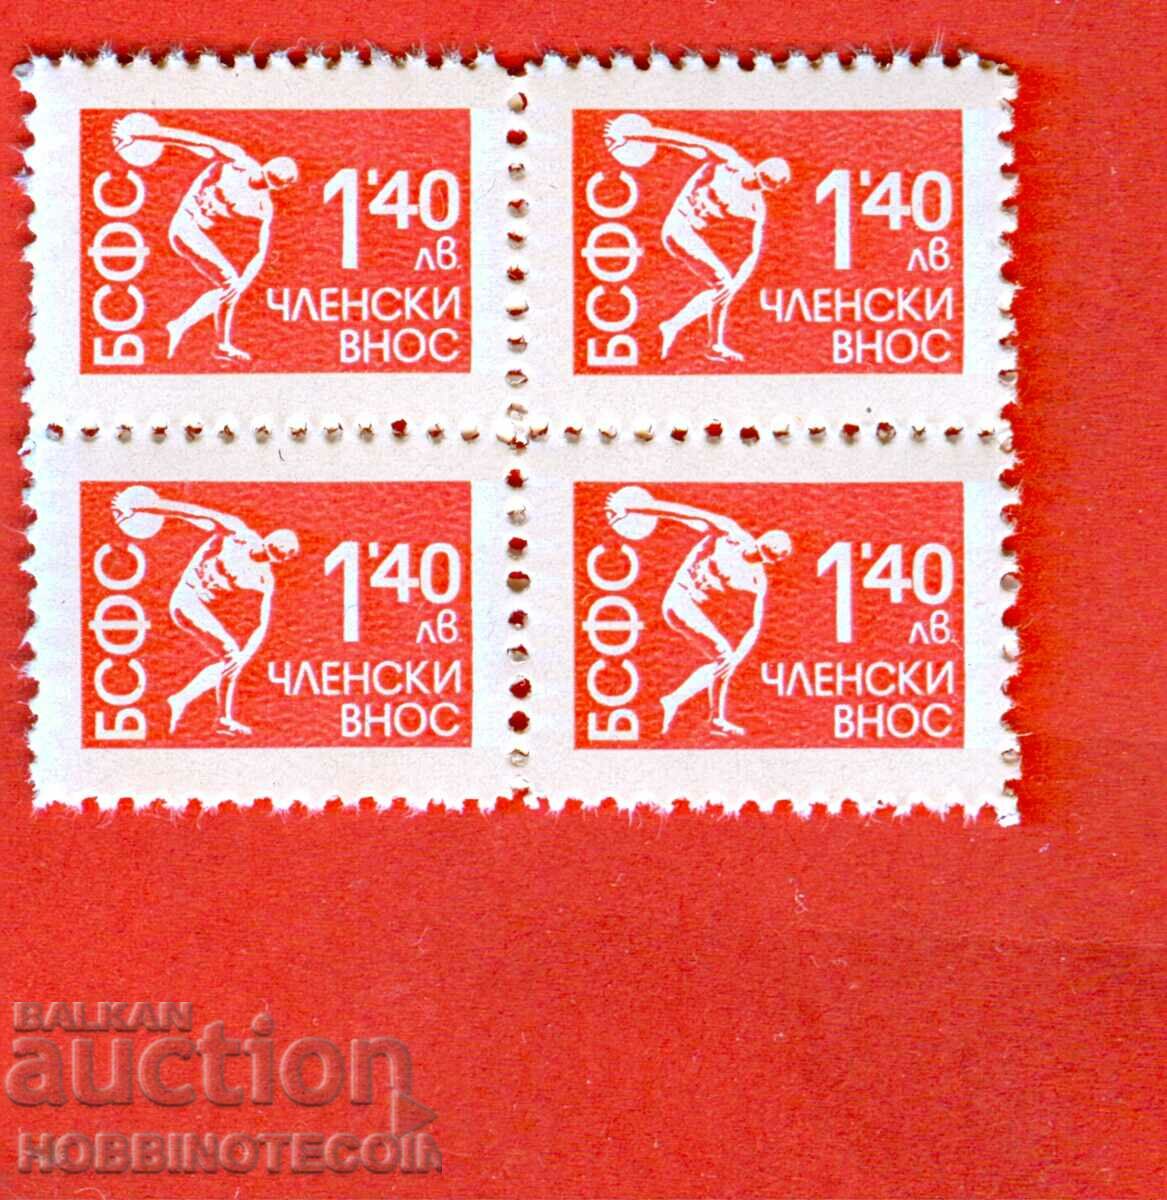 BULGARIA STAMPS BRAND MEMBER IMPORT SQUARE 4 x 1.40 BSFS NEW